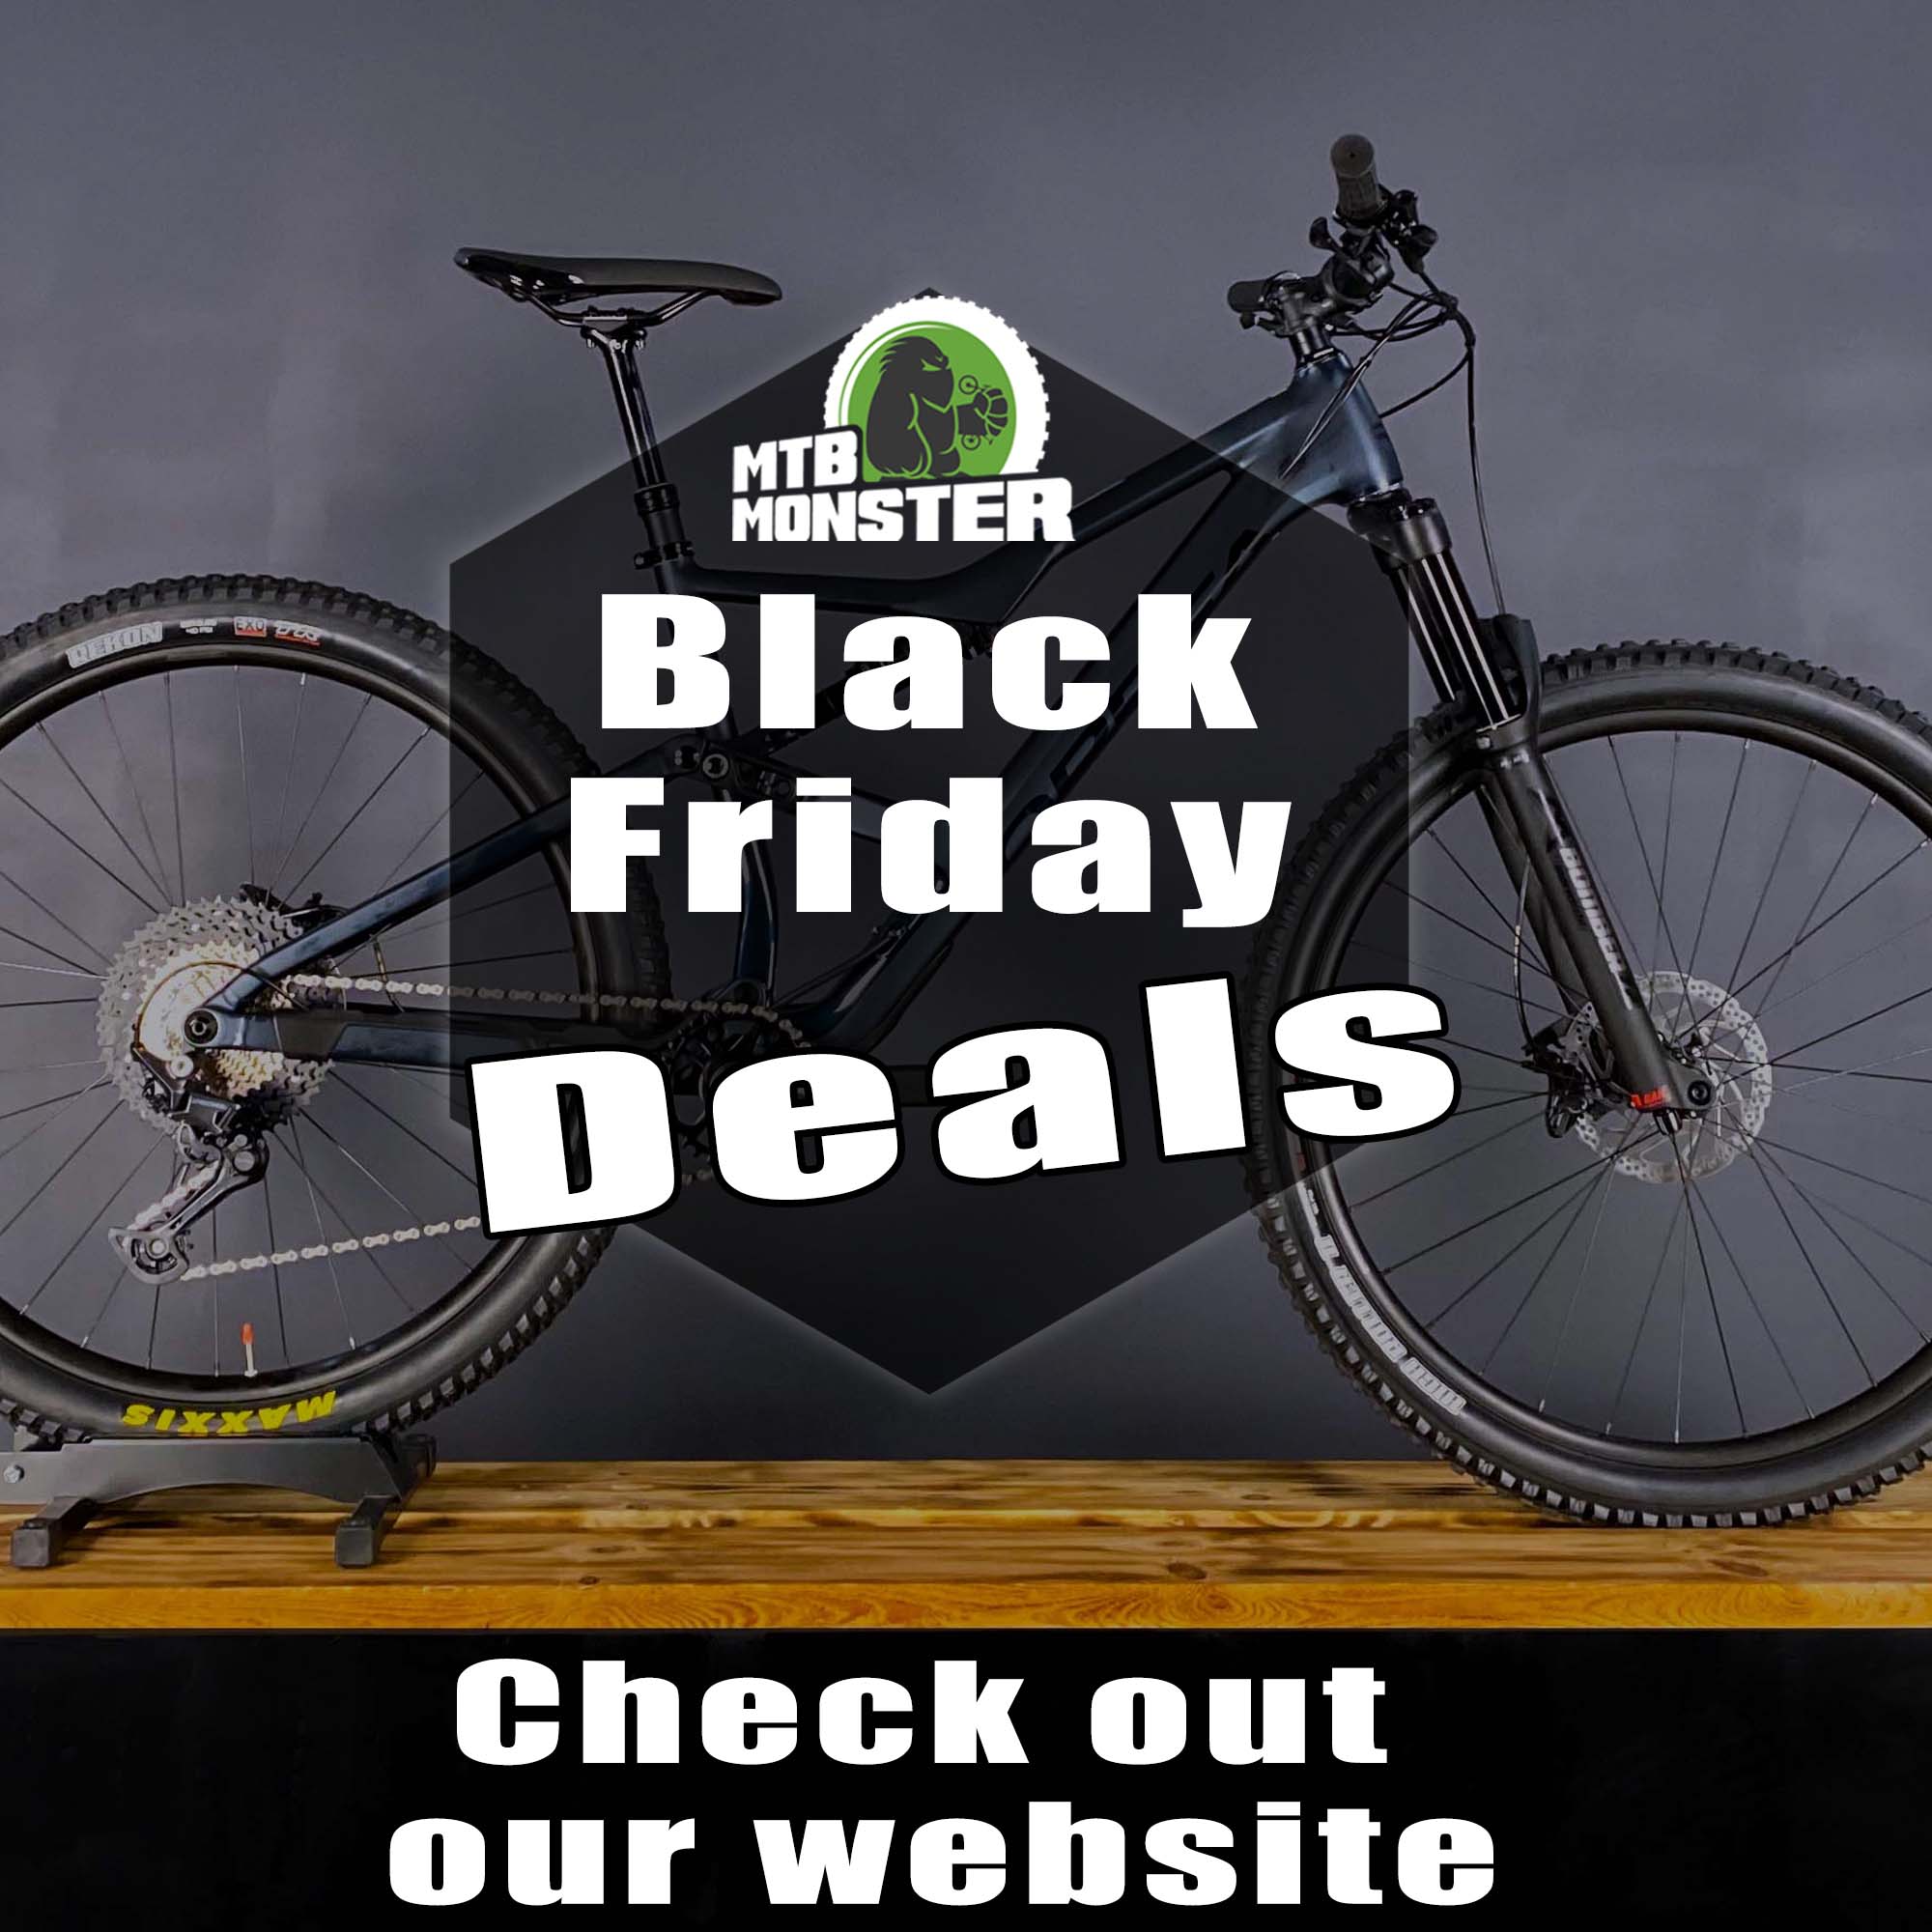 Druif behang Digitaal Check out our exclusive Black Friday offers on our website - MTB Monster